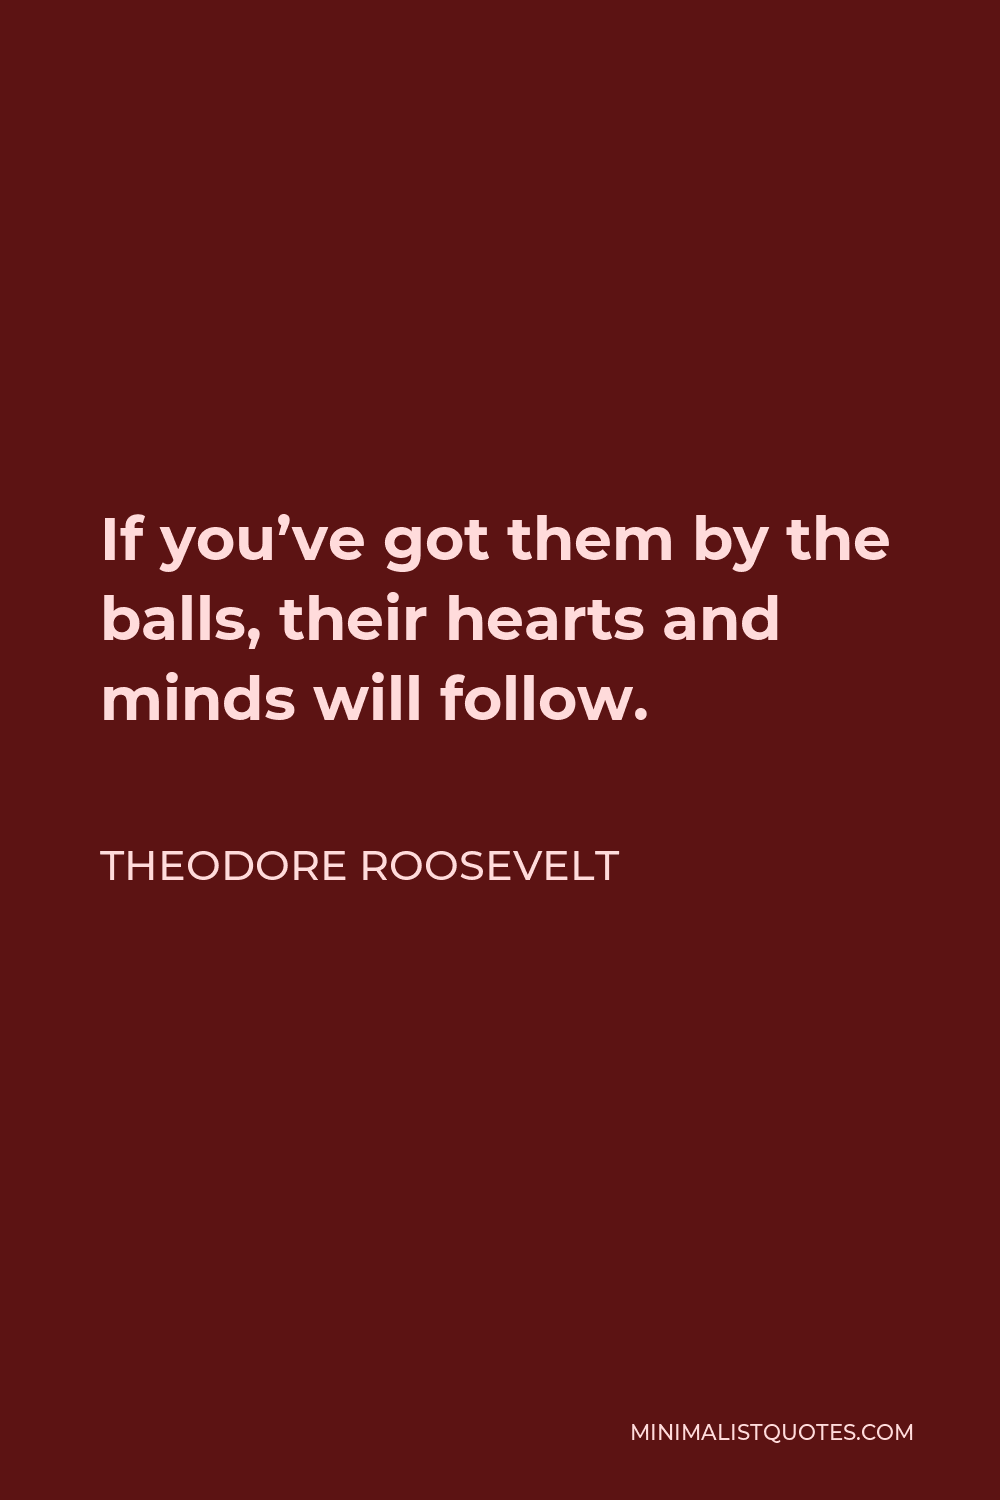 Theodore Roosevelt Quote - If you’ve got them by the balls, their hearts and minds will follow.